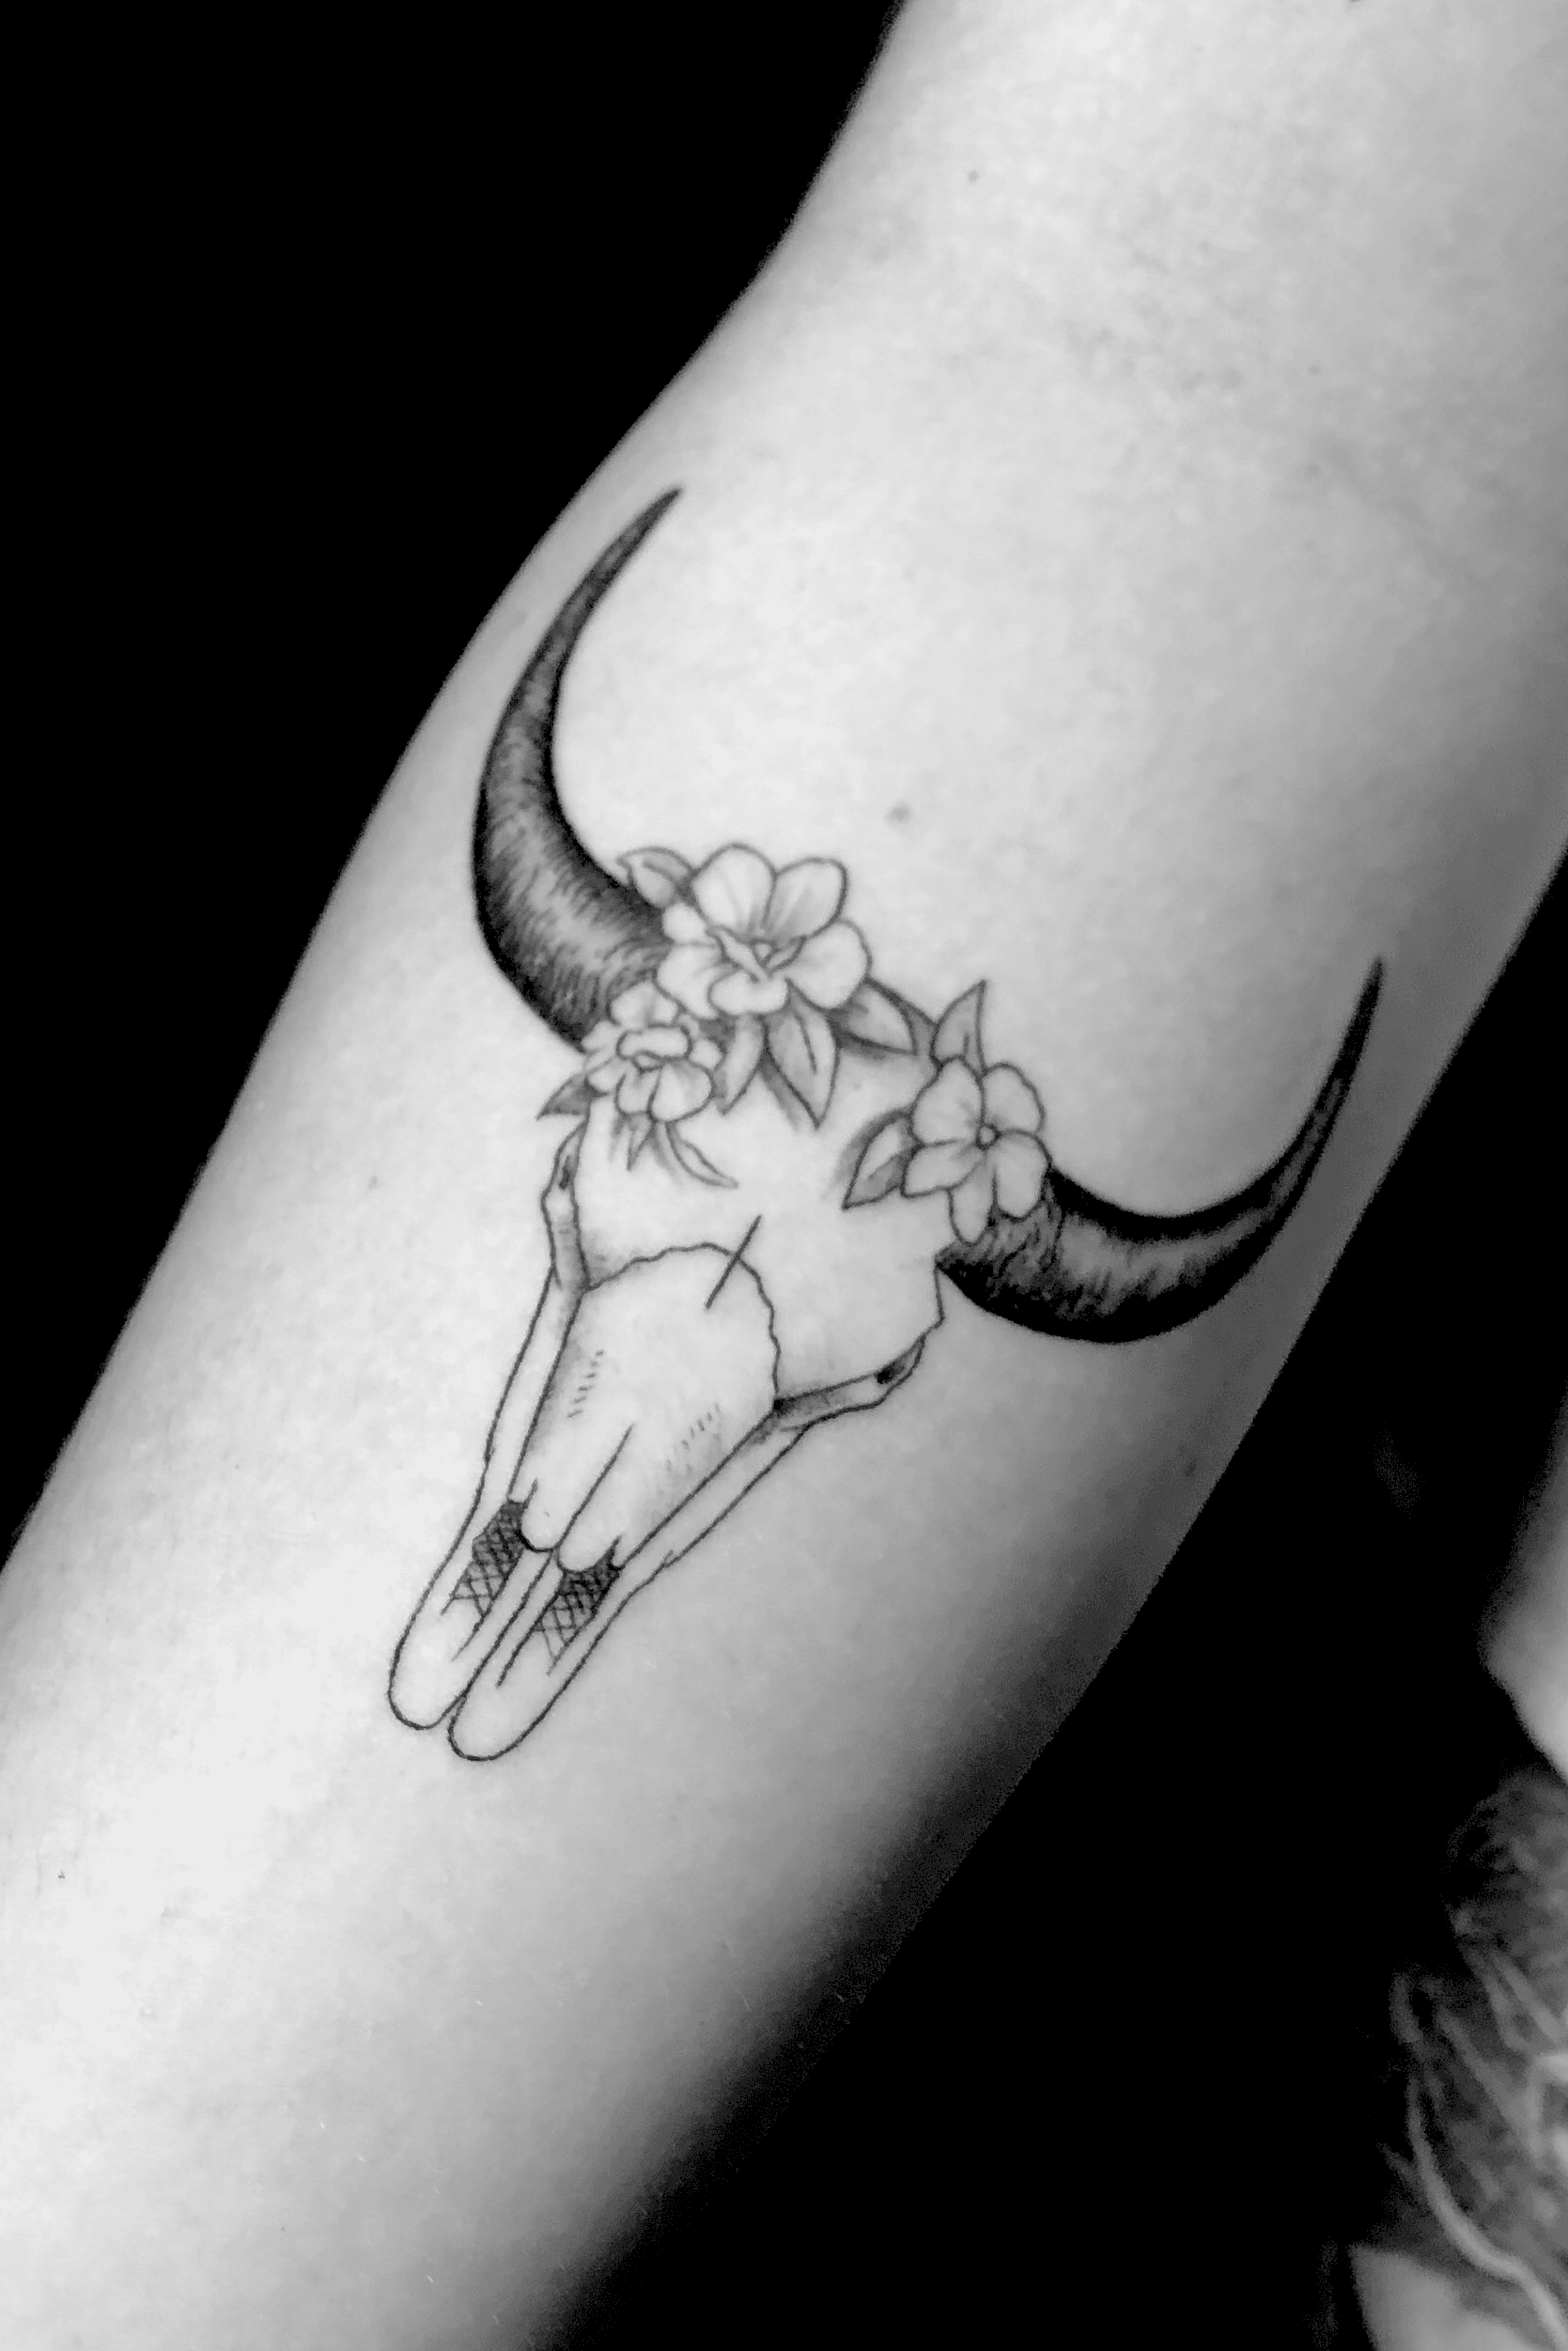 Bull skull tattoo by Annelie Fransson inked on the right forearm  Bull  skull tattoos Bull tattoos Eye tattoo